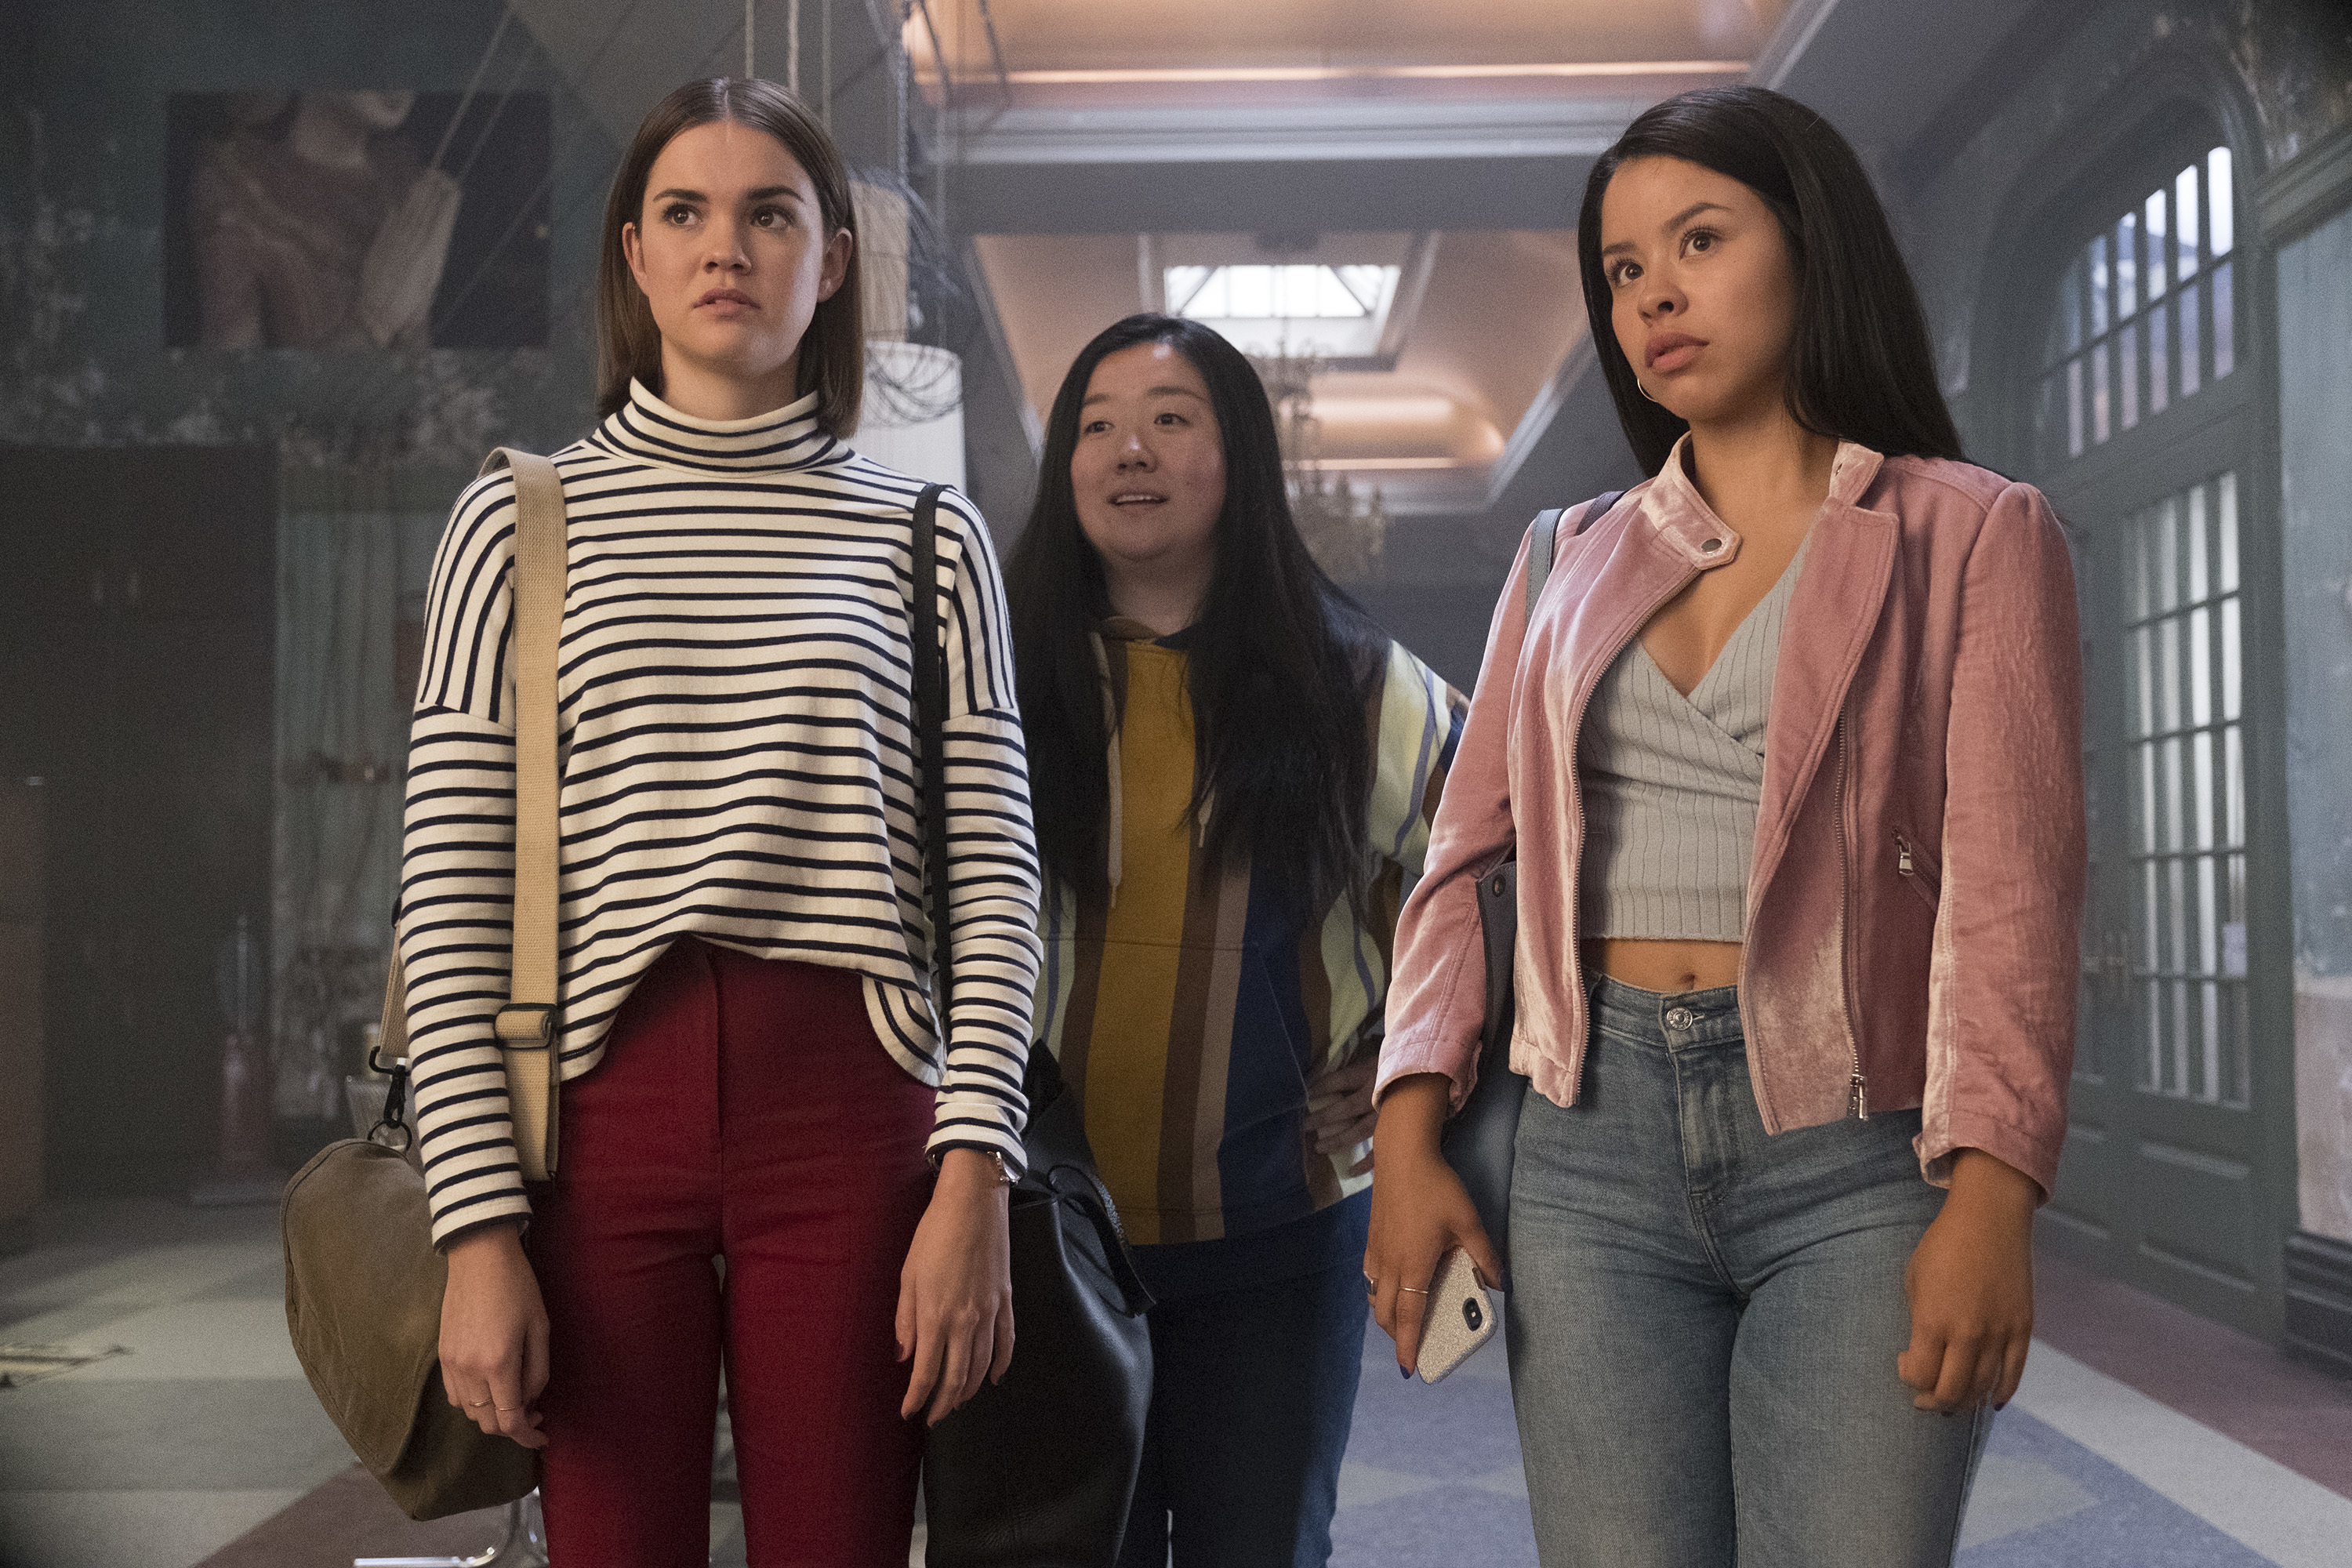 Take Your First Look at Freeform’s New Series, Good Trouble